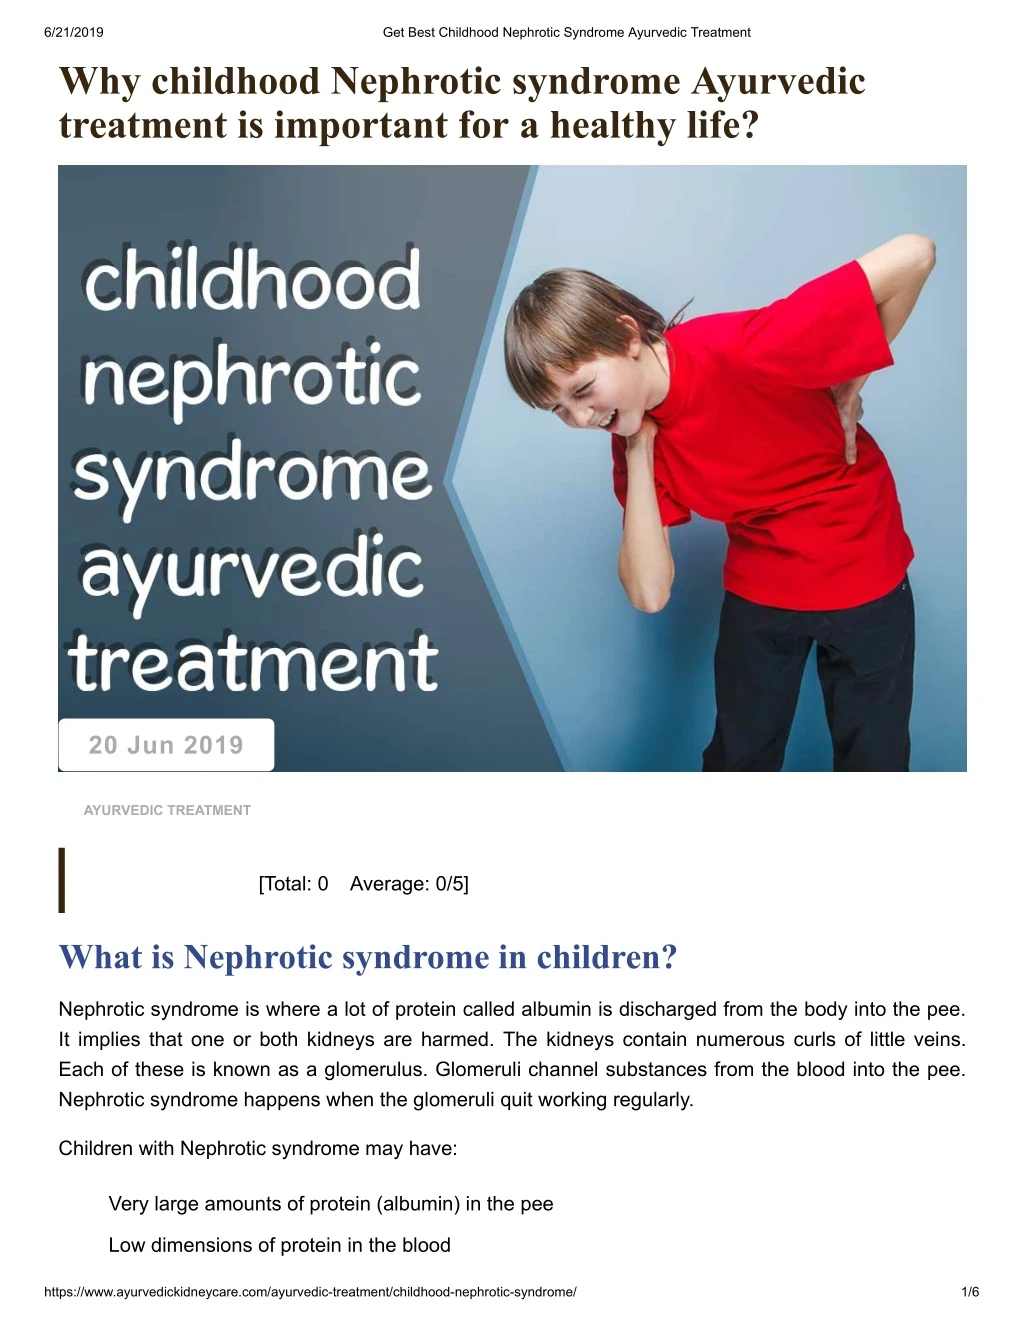 6 21 2019 why childhood nephrotic syndrome